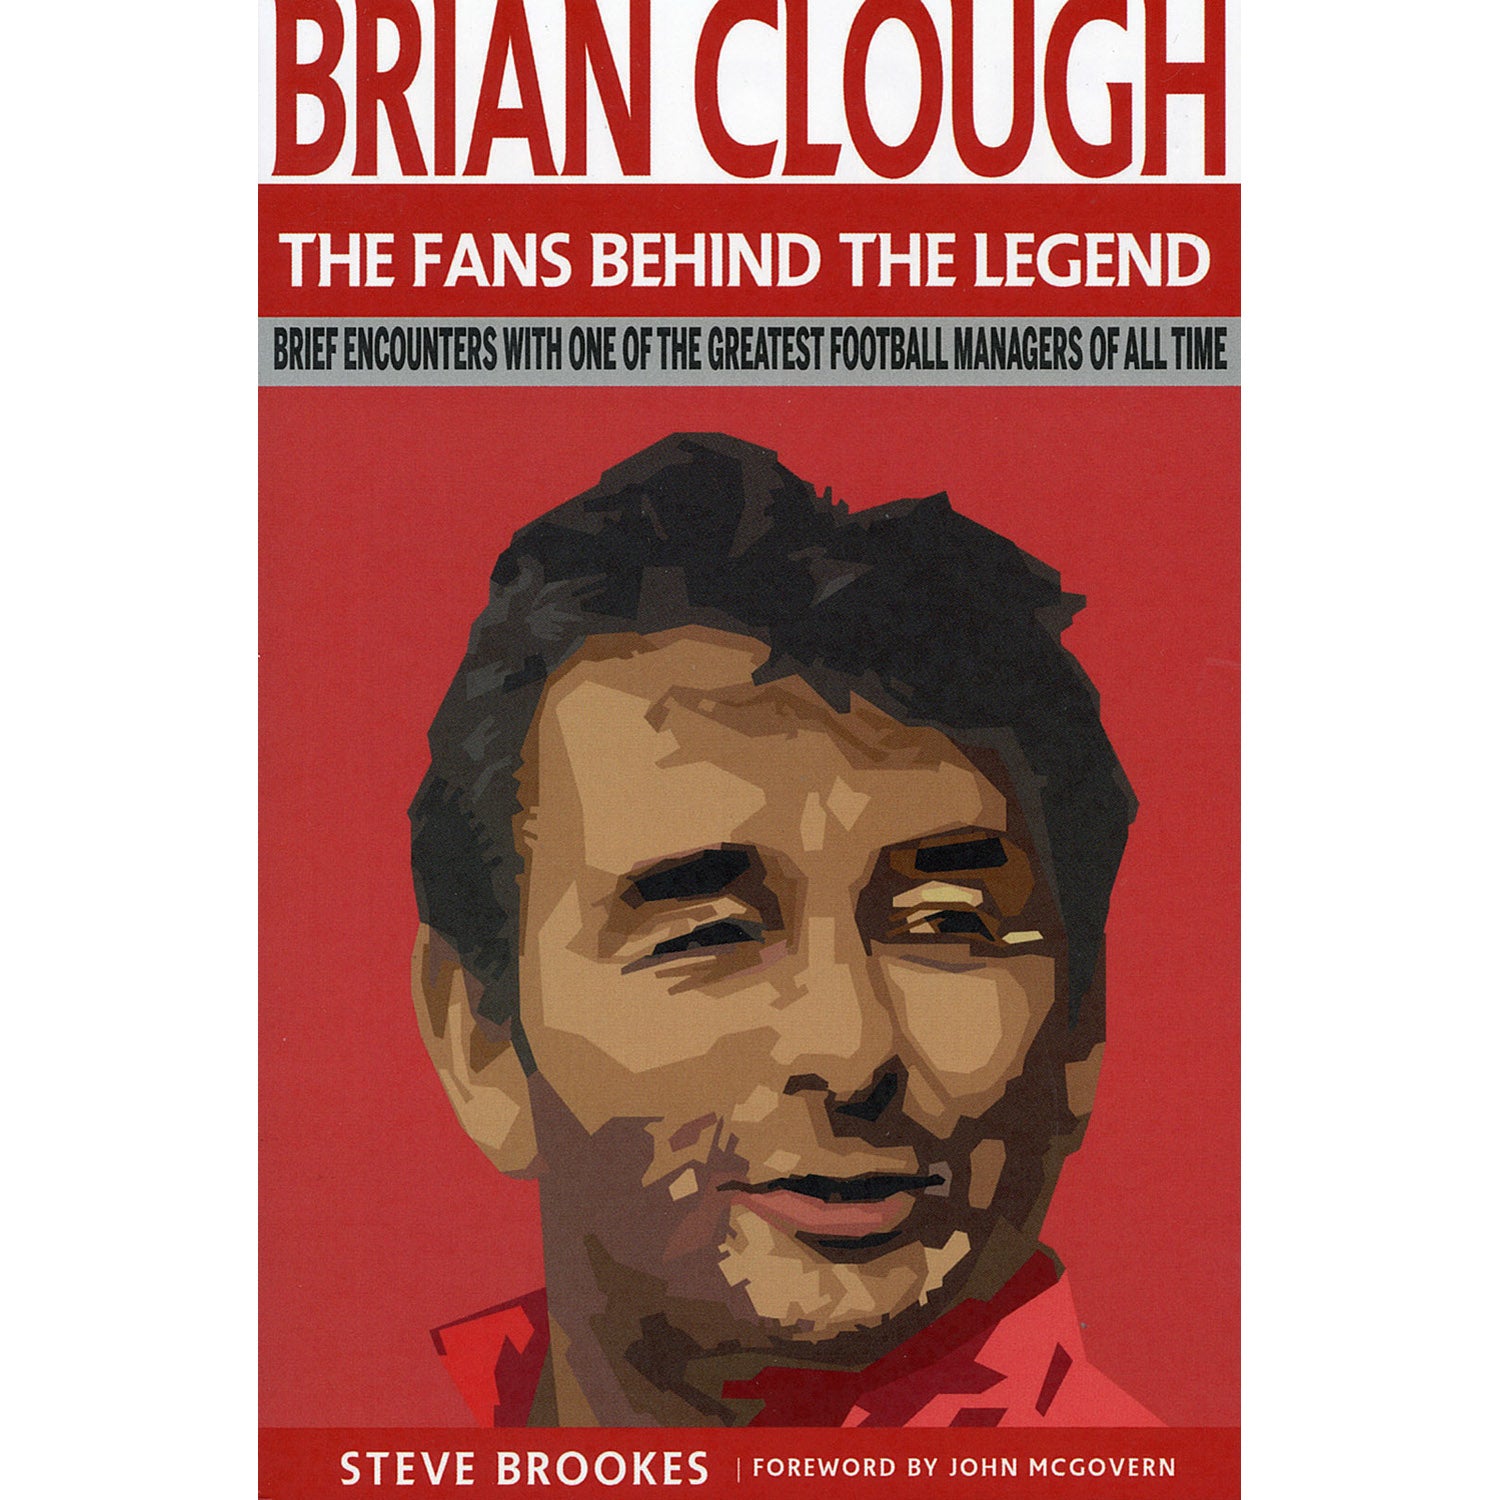 Brian Clough – The Fans Behind the Legend